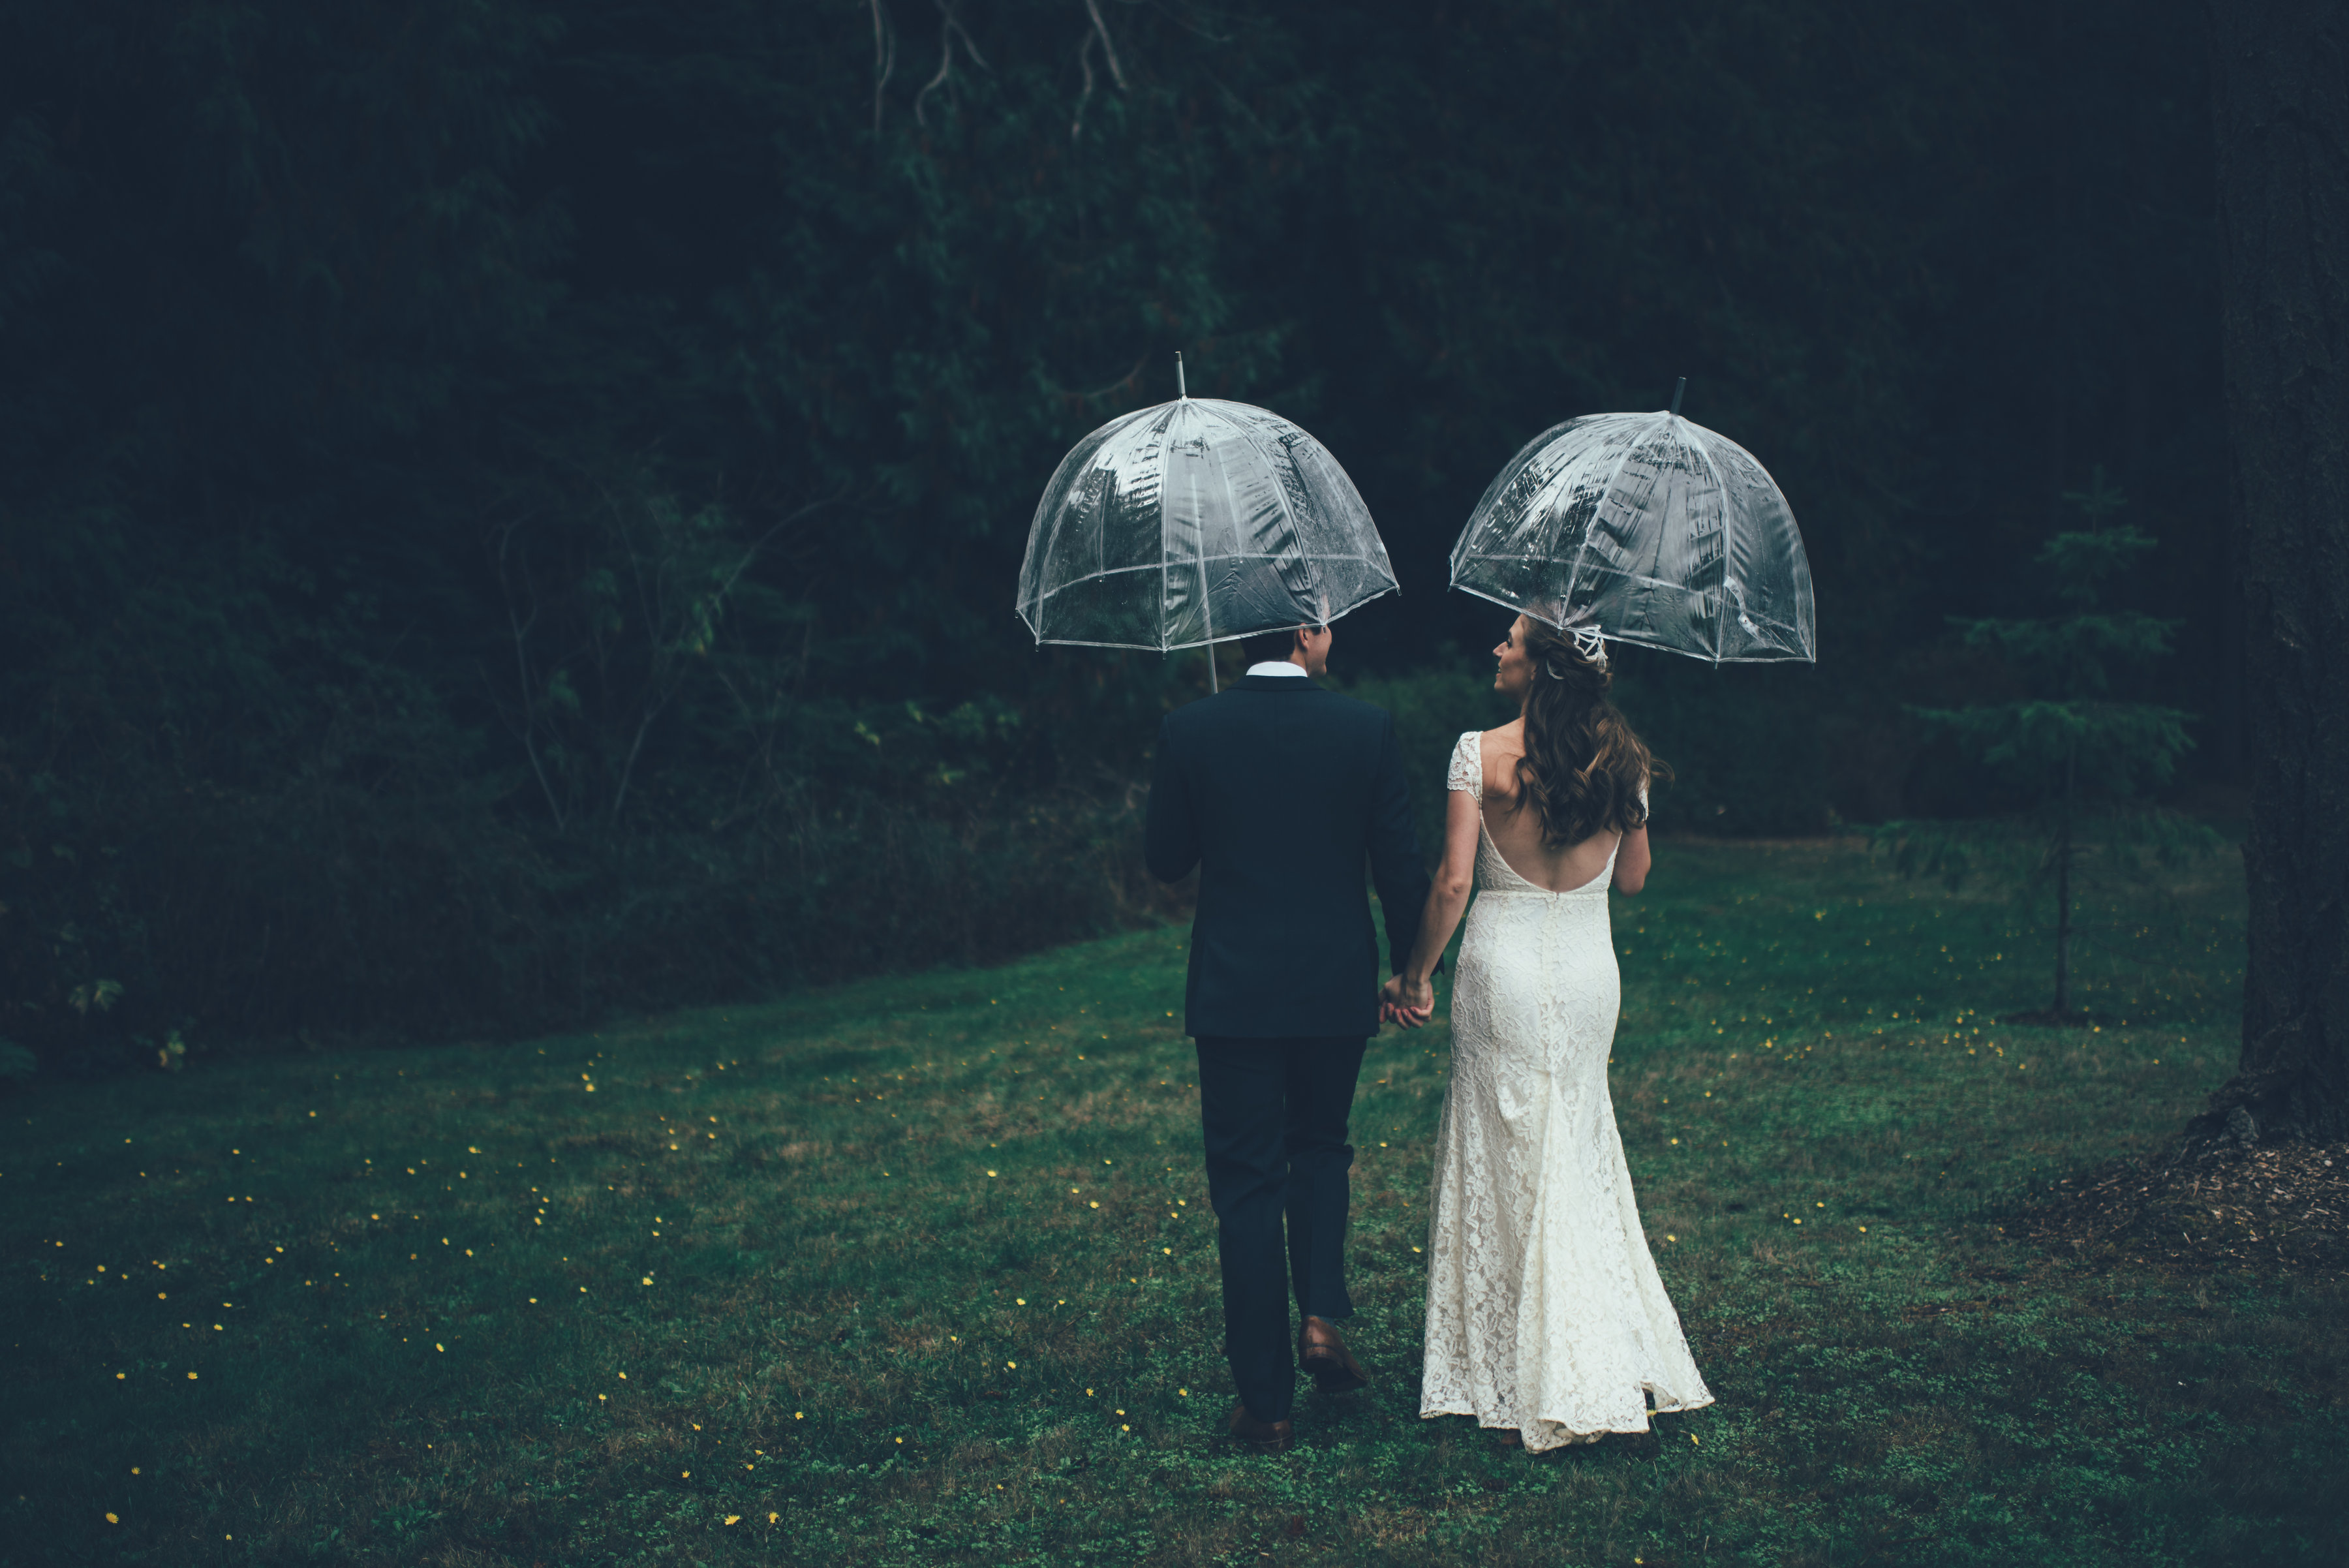 Bride and Groom walking with clean umbrellas on their Fall wedding day